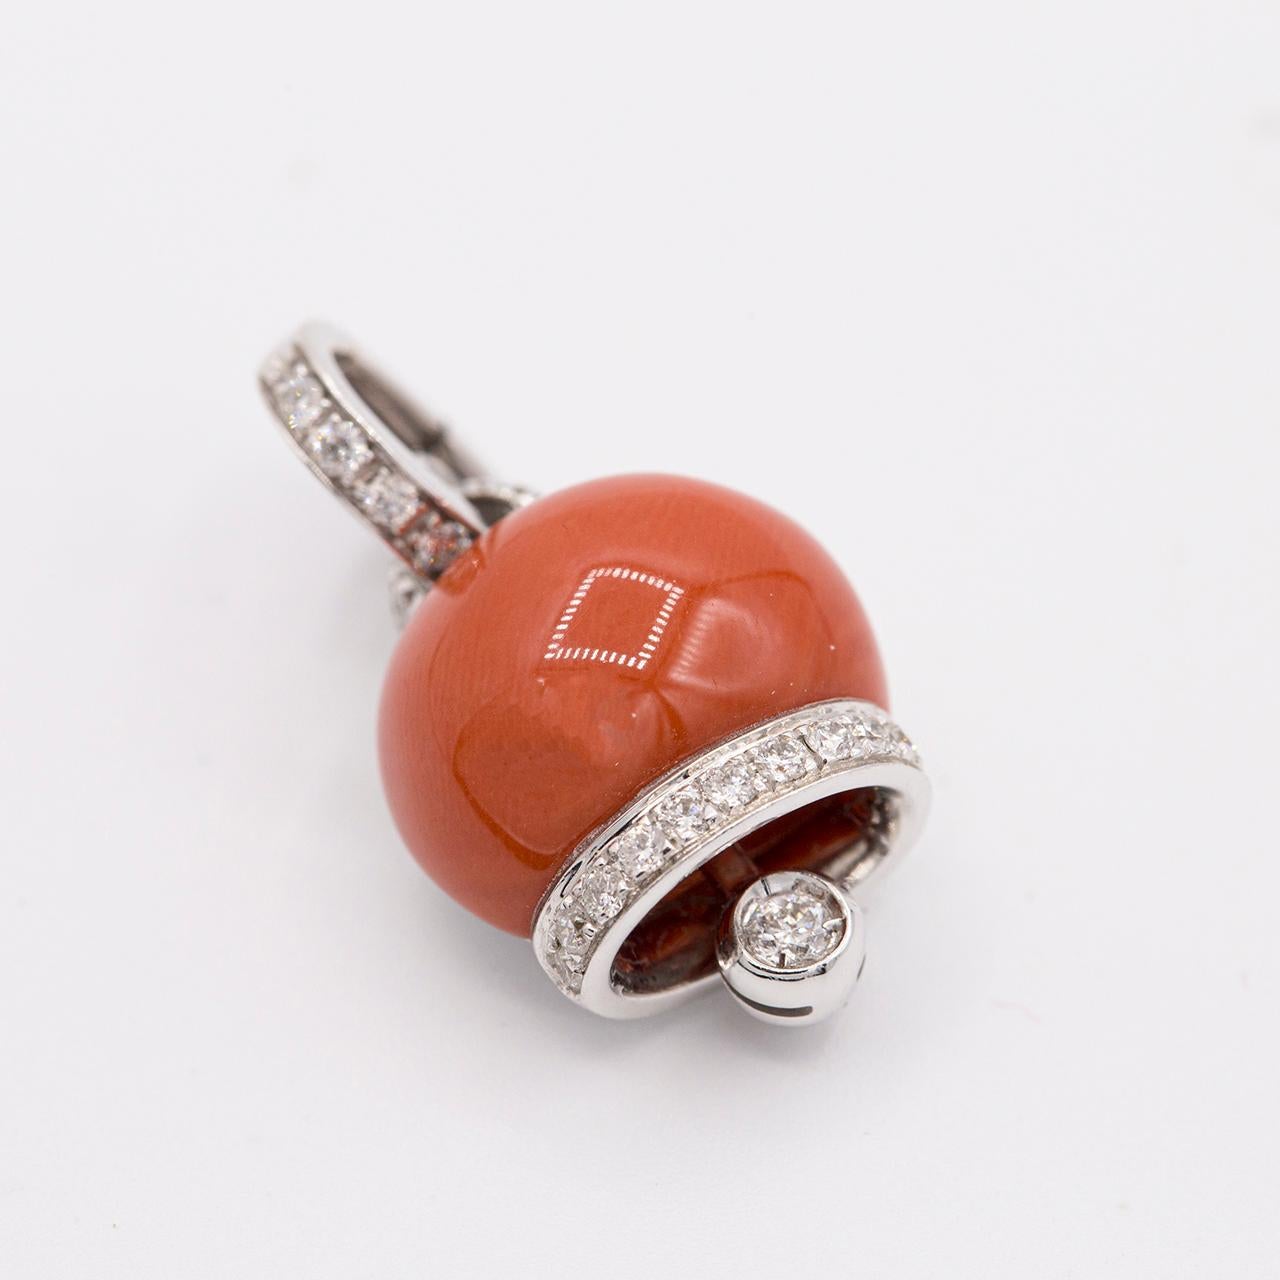 Chantecler jewelry is inspired by the Island of Capri's exotic natural environment. From the Campanella Collection, red coral and pave diamond charm handcrafted in 18k white gold. 